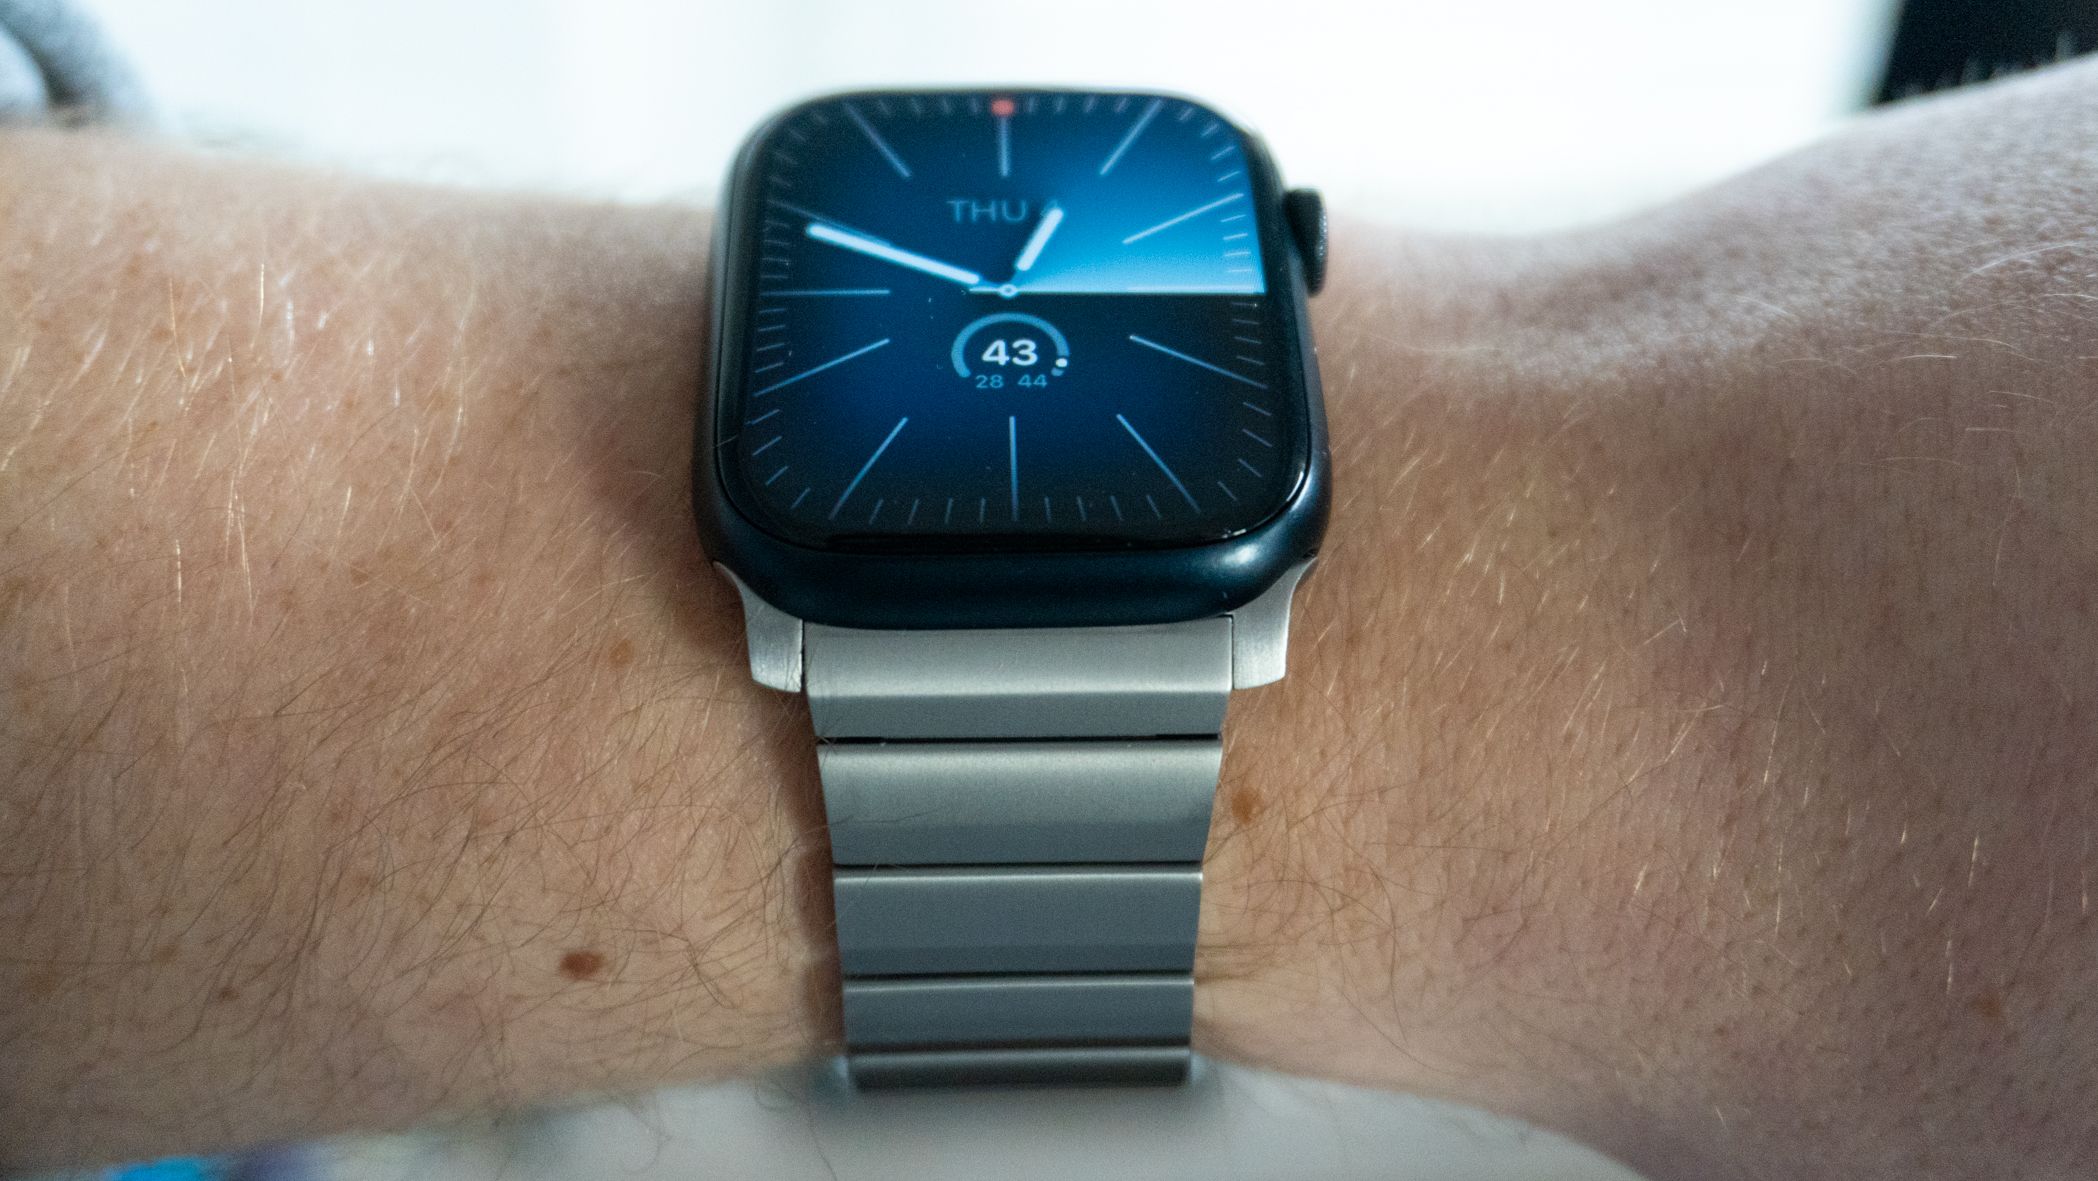 Nomad Titanium Band review: The ultimate metal Apple Watch band